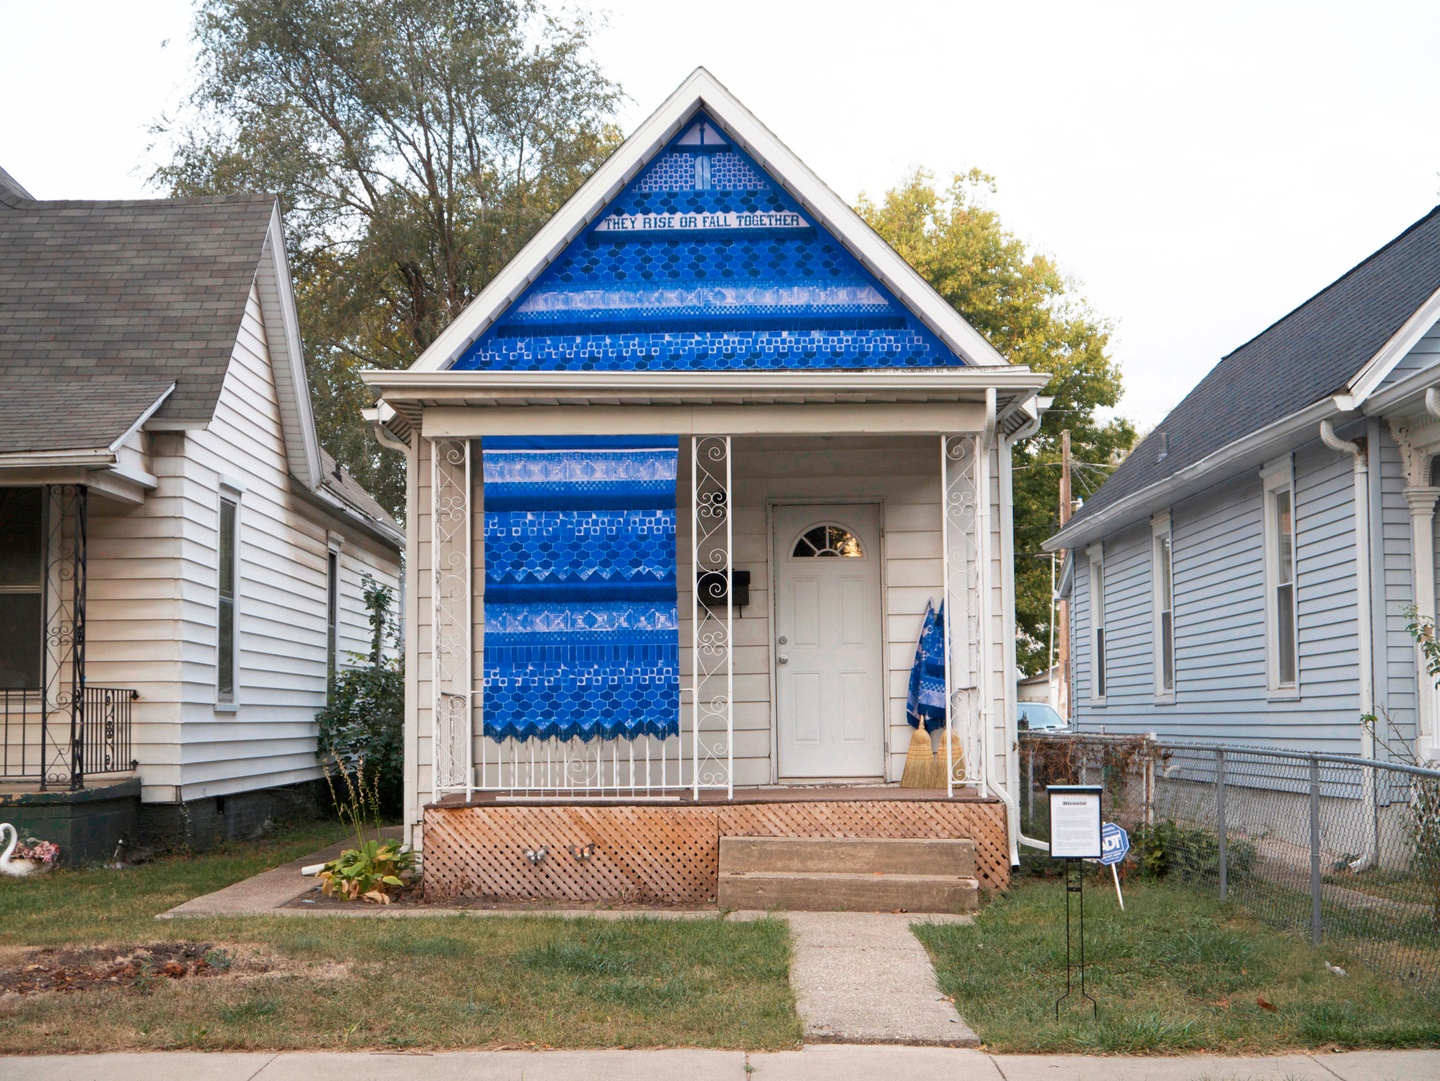 A textile placed on the façade of a house. The textile consists of a blue and white geometric pattern, with the text "THEY RISE OR FALL TOGETHER" — the fabric also hangs on the front of the house above two brooms.